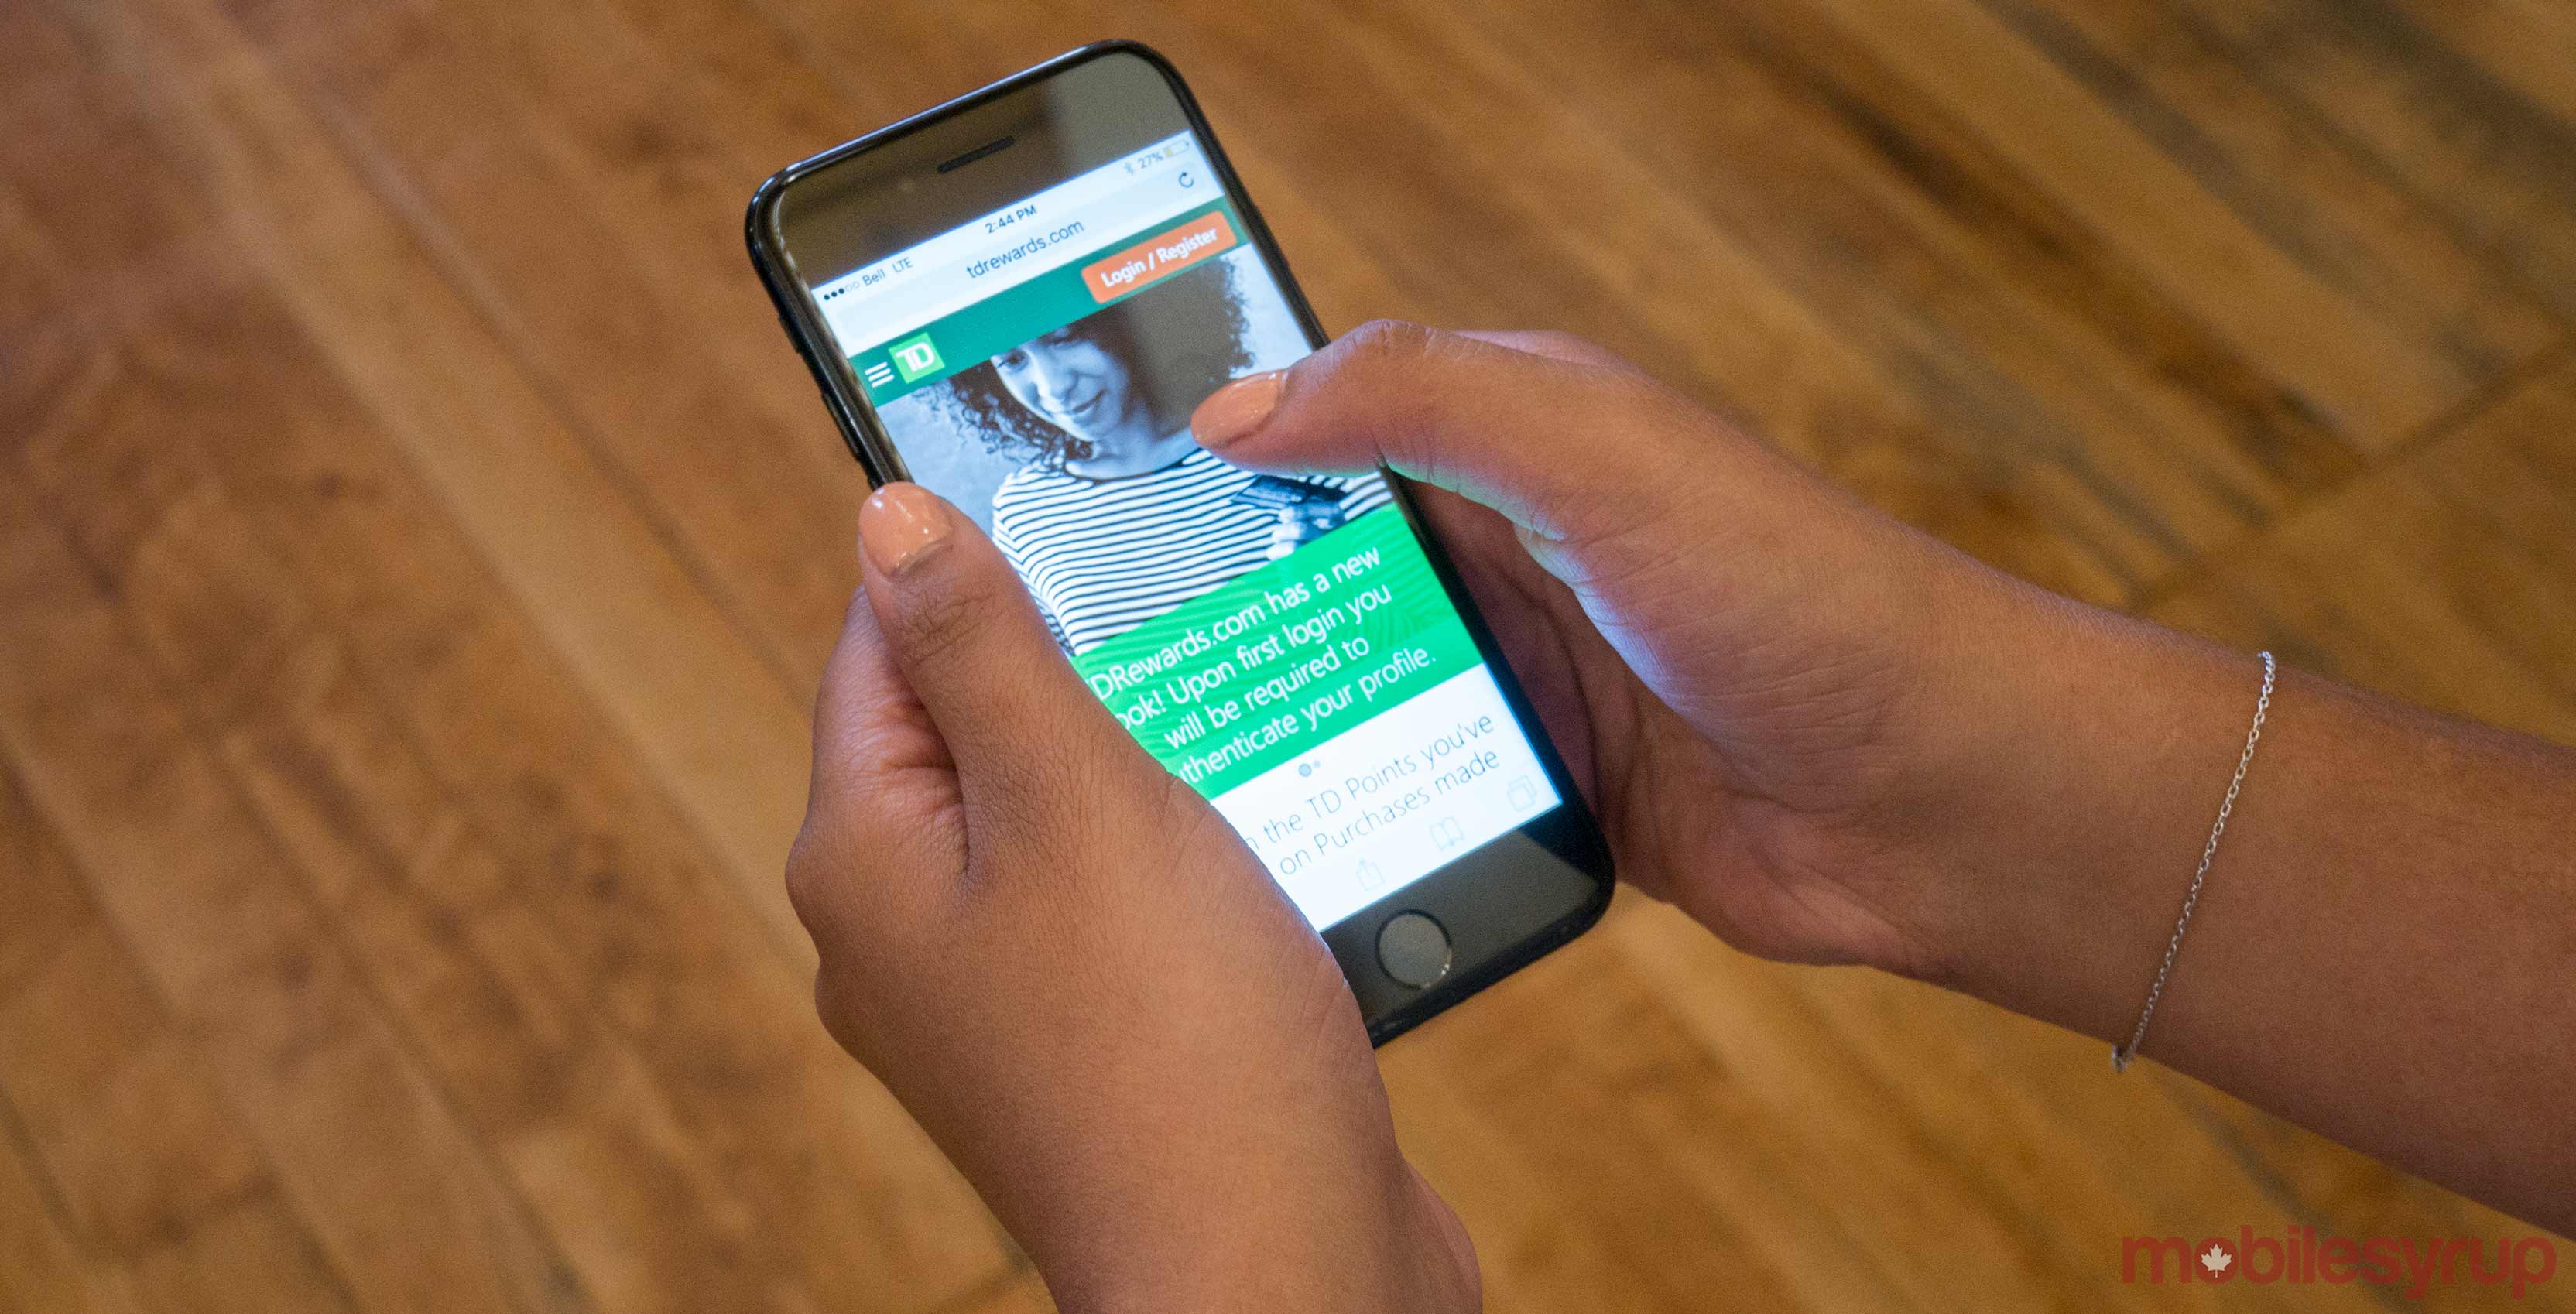 An image showing a hand holding an iPhone 7 with the TD Rewards website on-screen